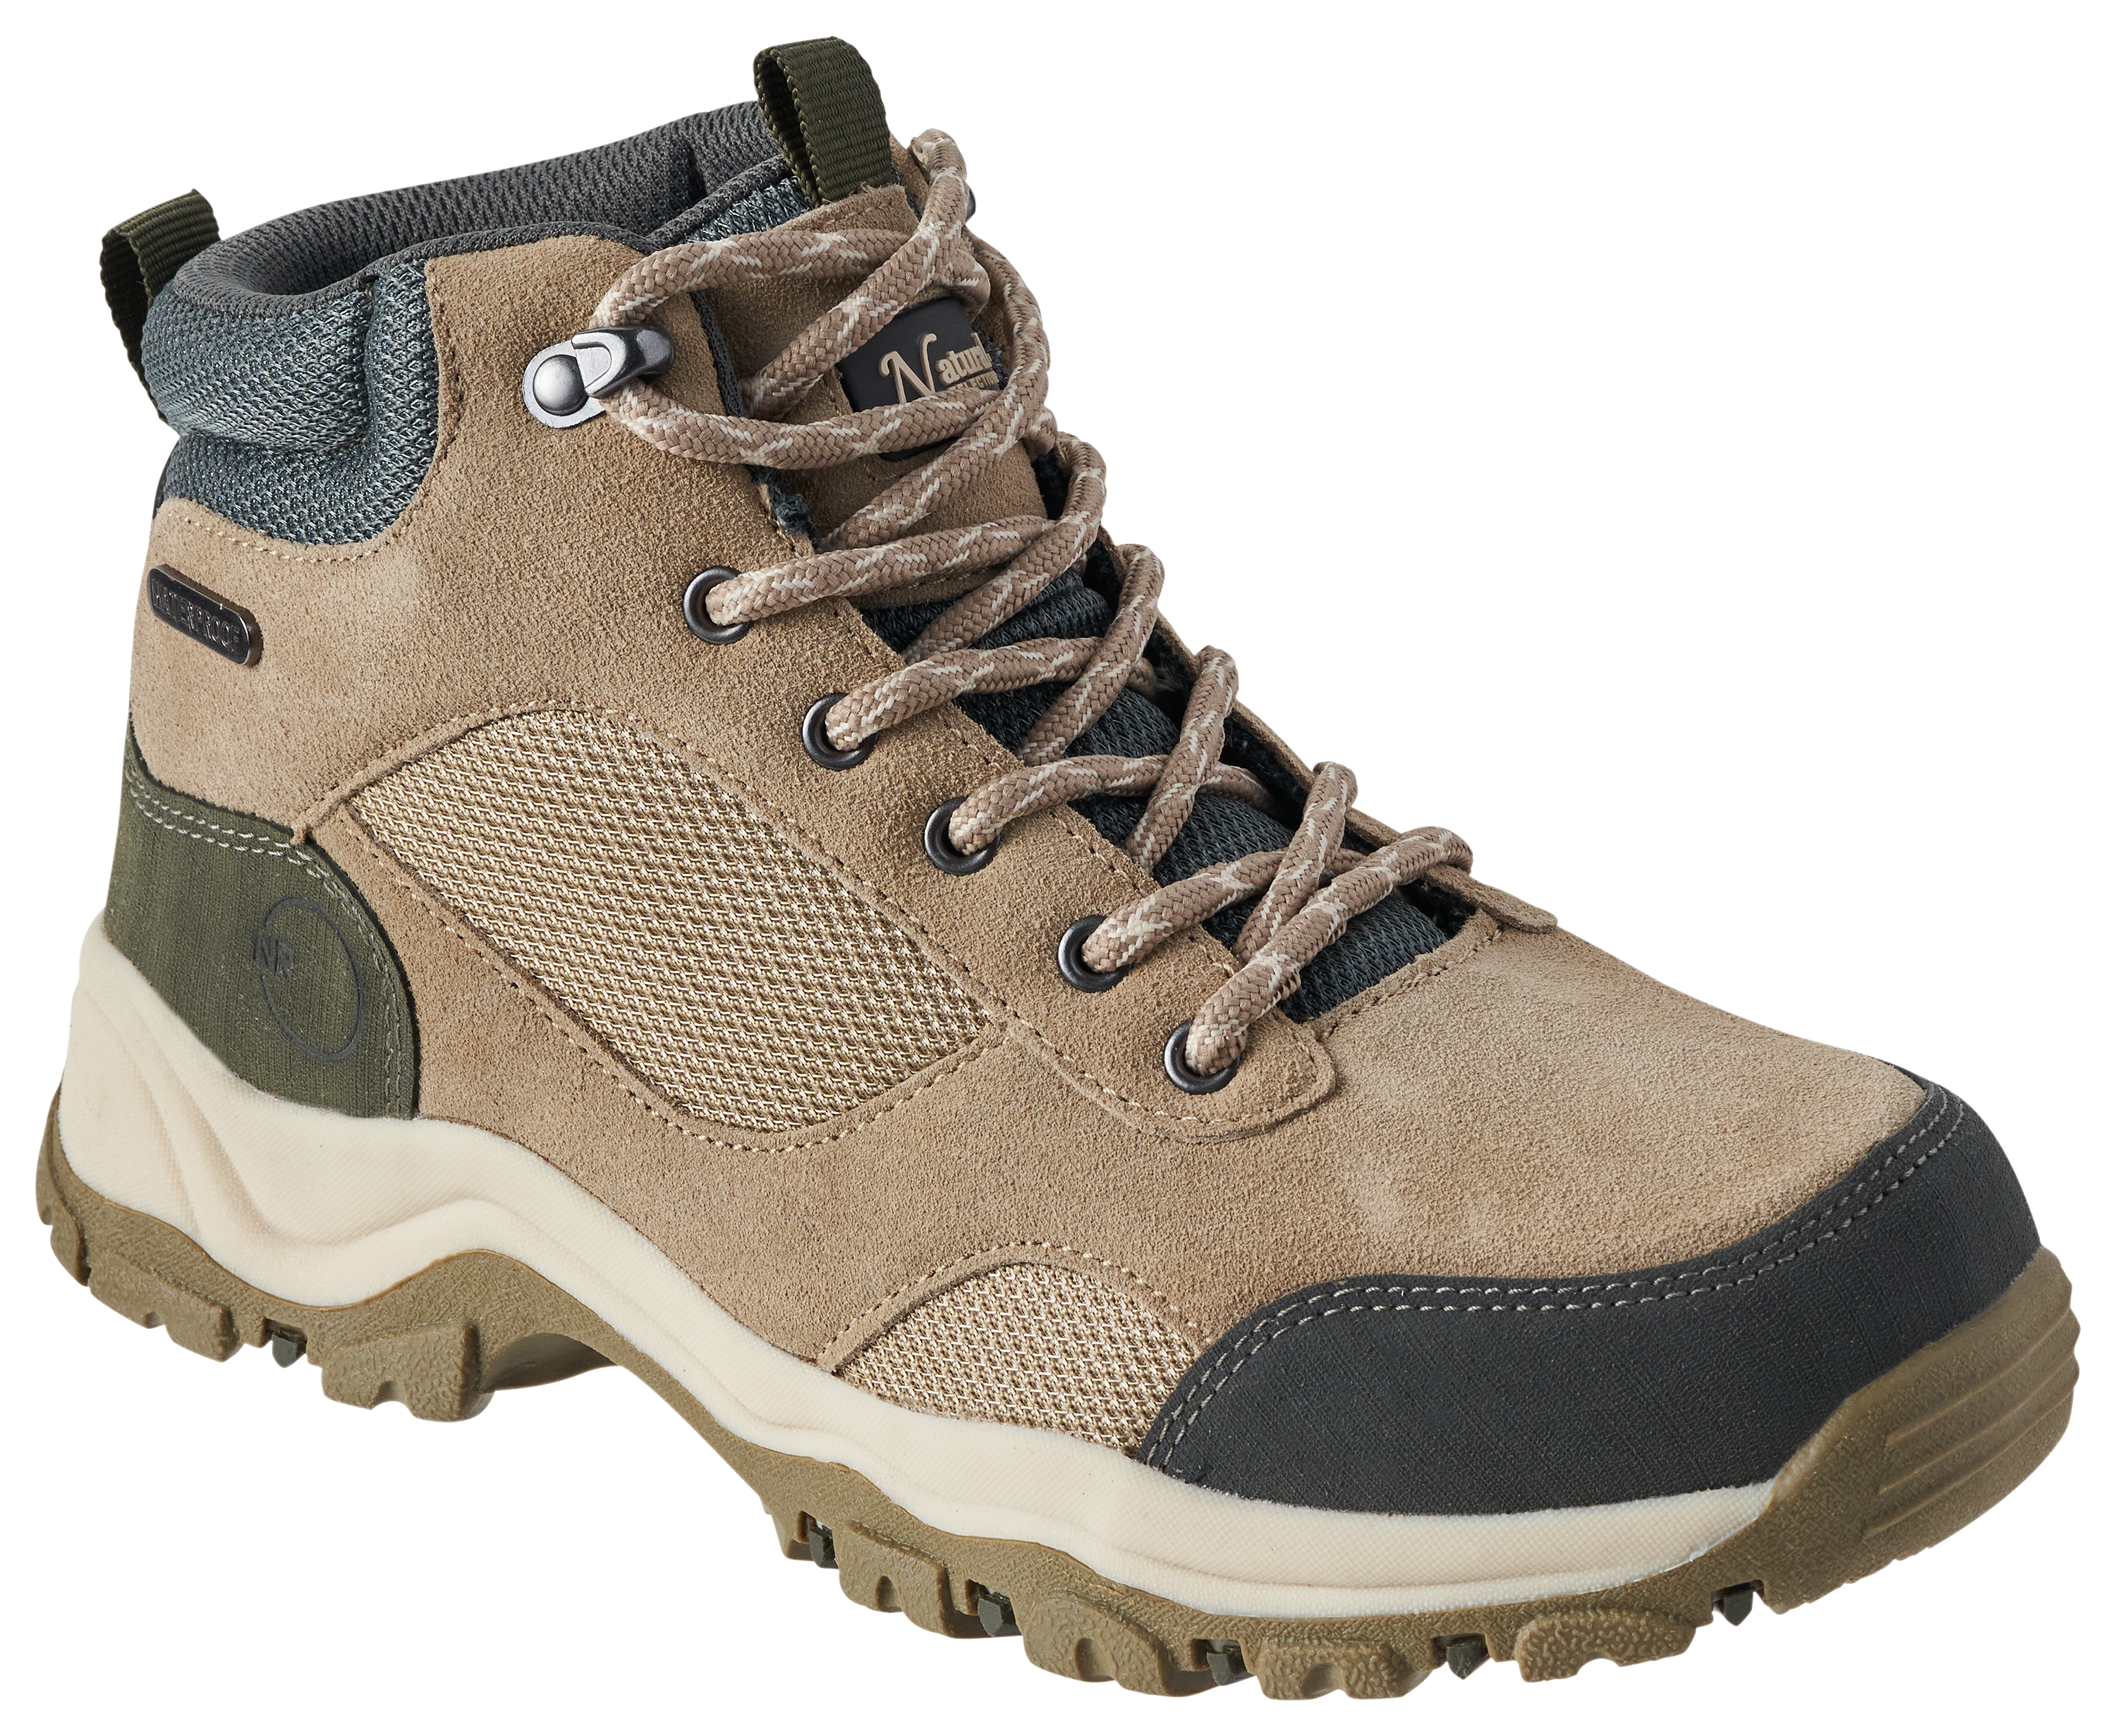 Natural Reflections Skyline II Mid Waterproof Hiking Boots for Ladies - Tan/Charcoal - 7.5M